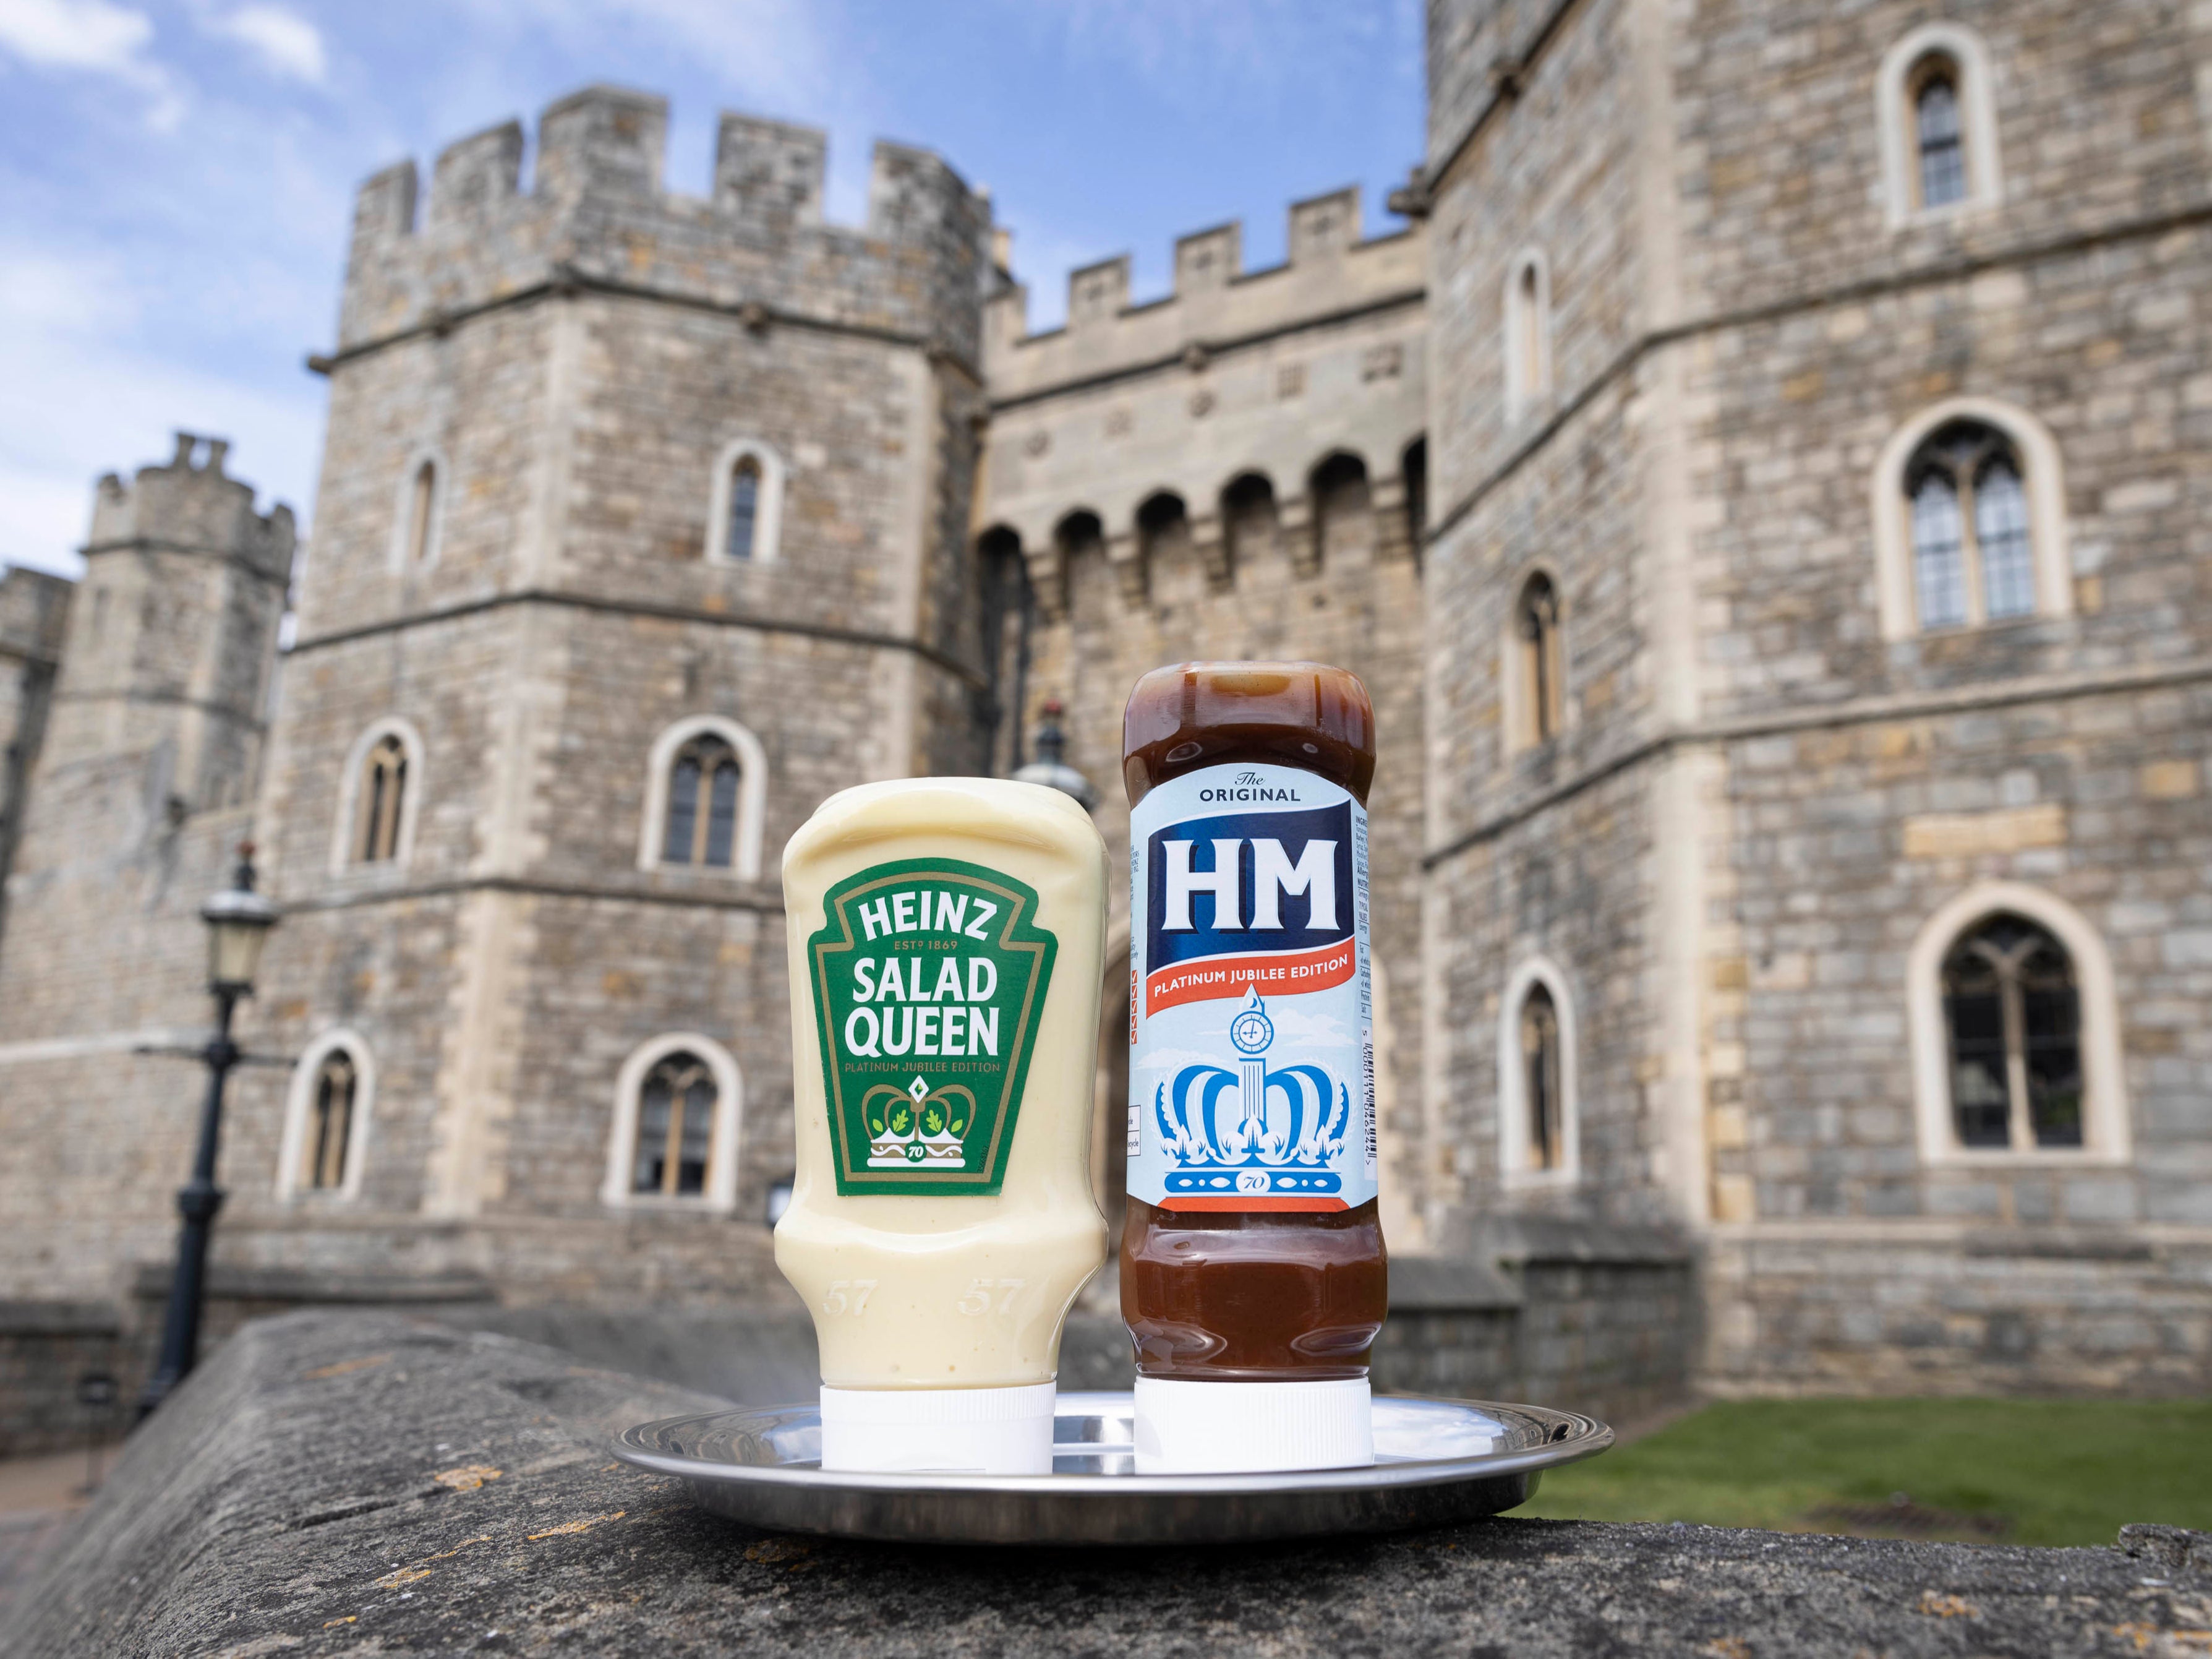 Limited edition Jubilee bottles of Heinz Salad Cream and HP Sauce, which have been renamed 'Heinz Salad Queen' and 'HM Sauce'